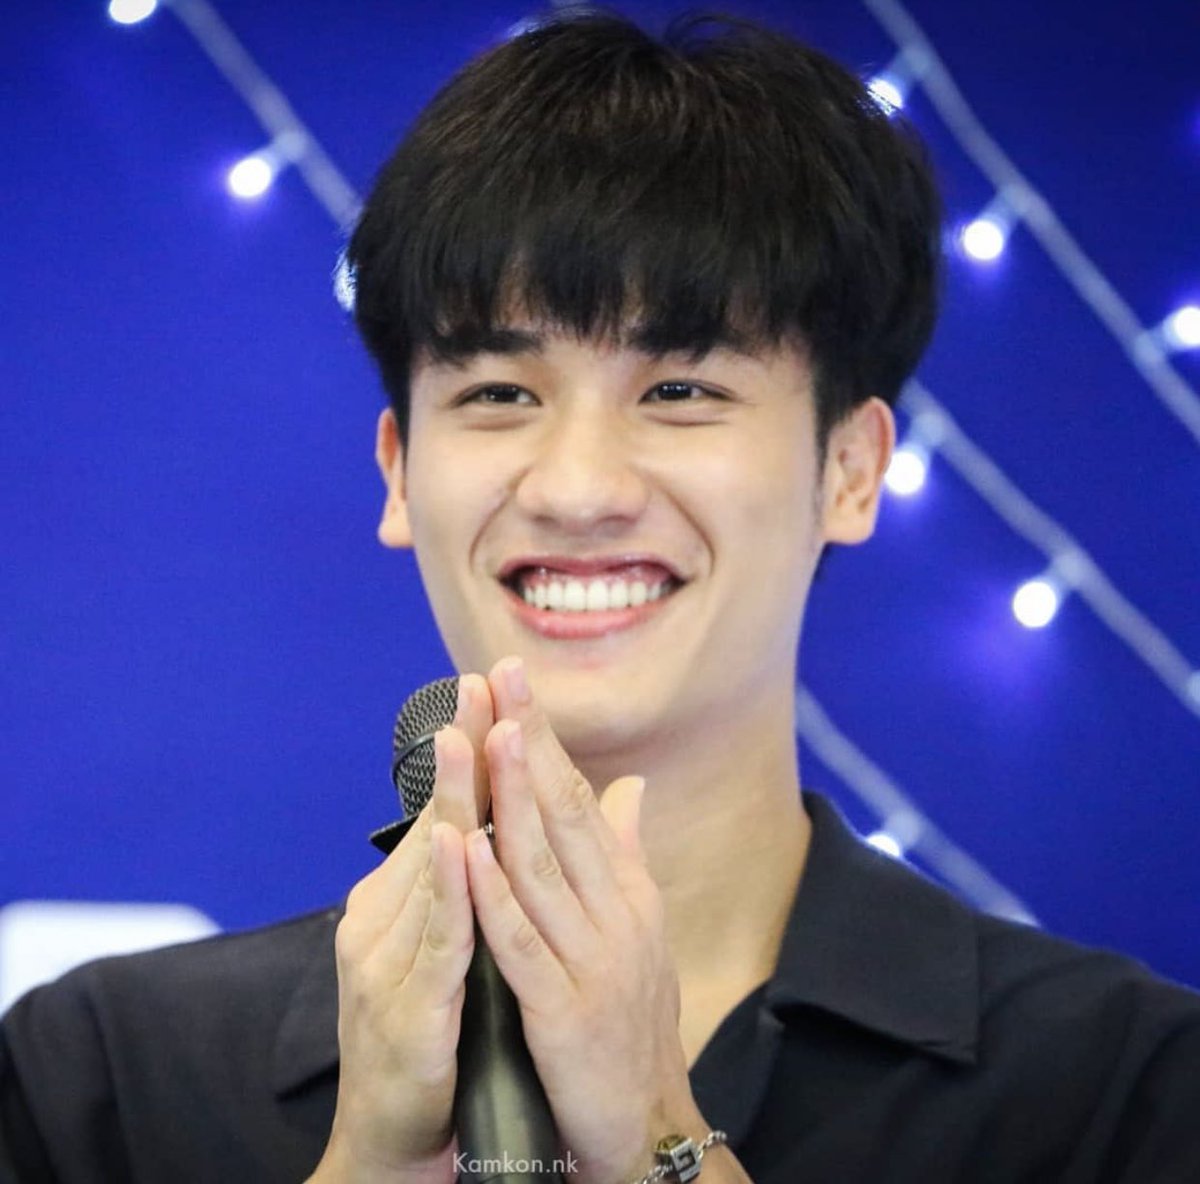 our days aren't complete without his gummy smiles  #Tawan_V  @Tawan_V